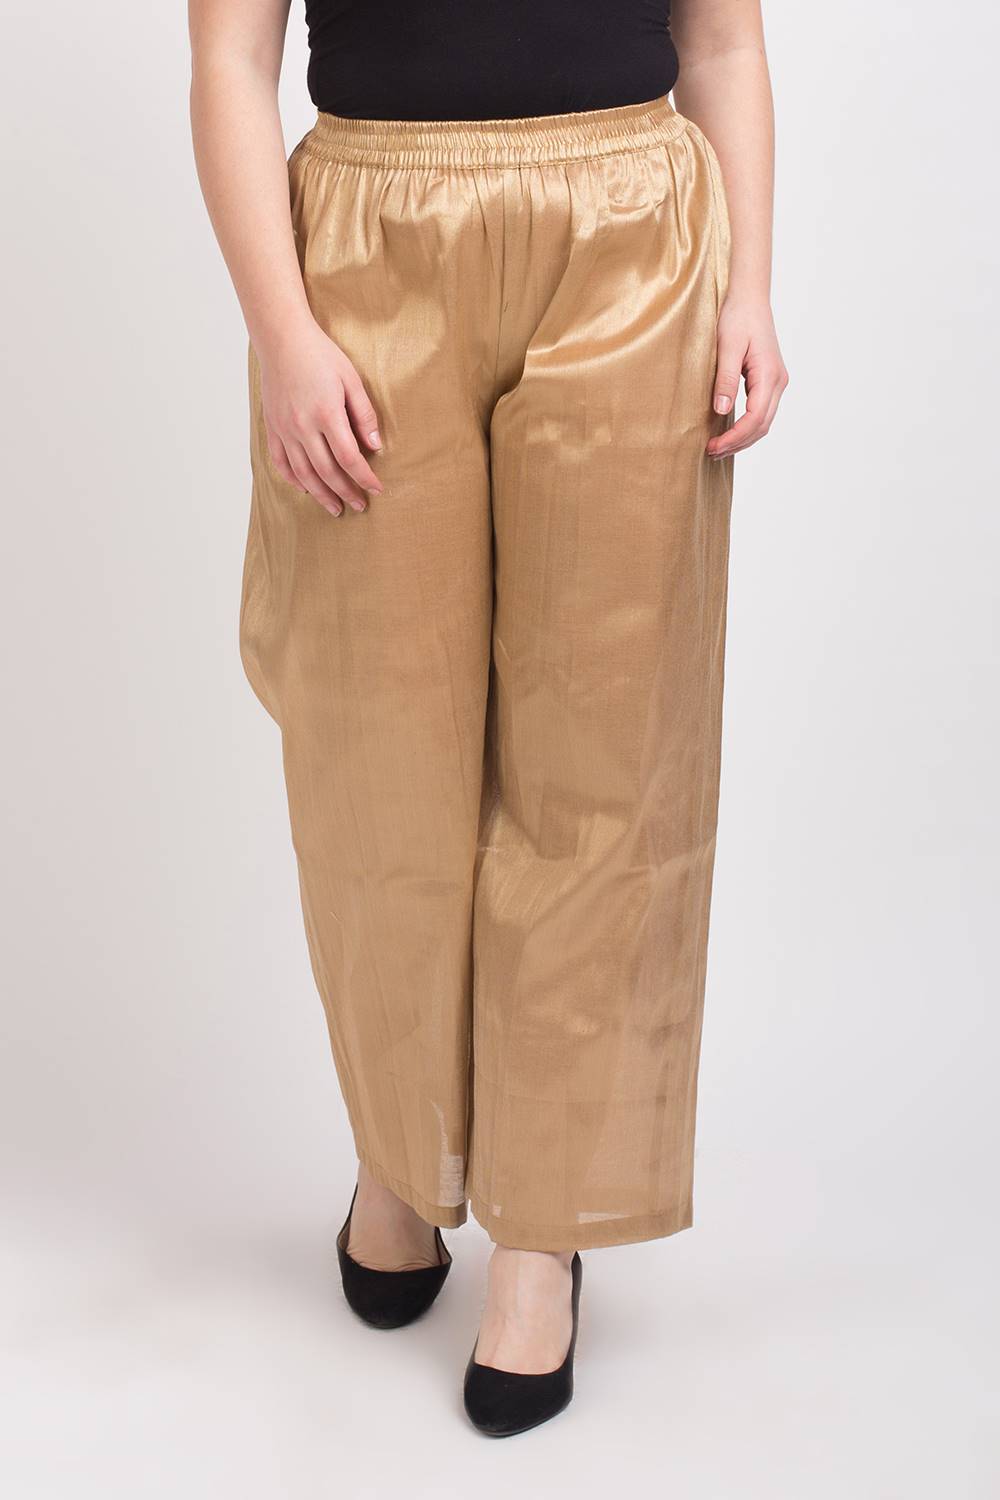 Ethnic Copper Gold Palazzo Pants for Women | Brown | Split-Skirts-Pants,  Printed